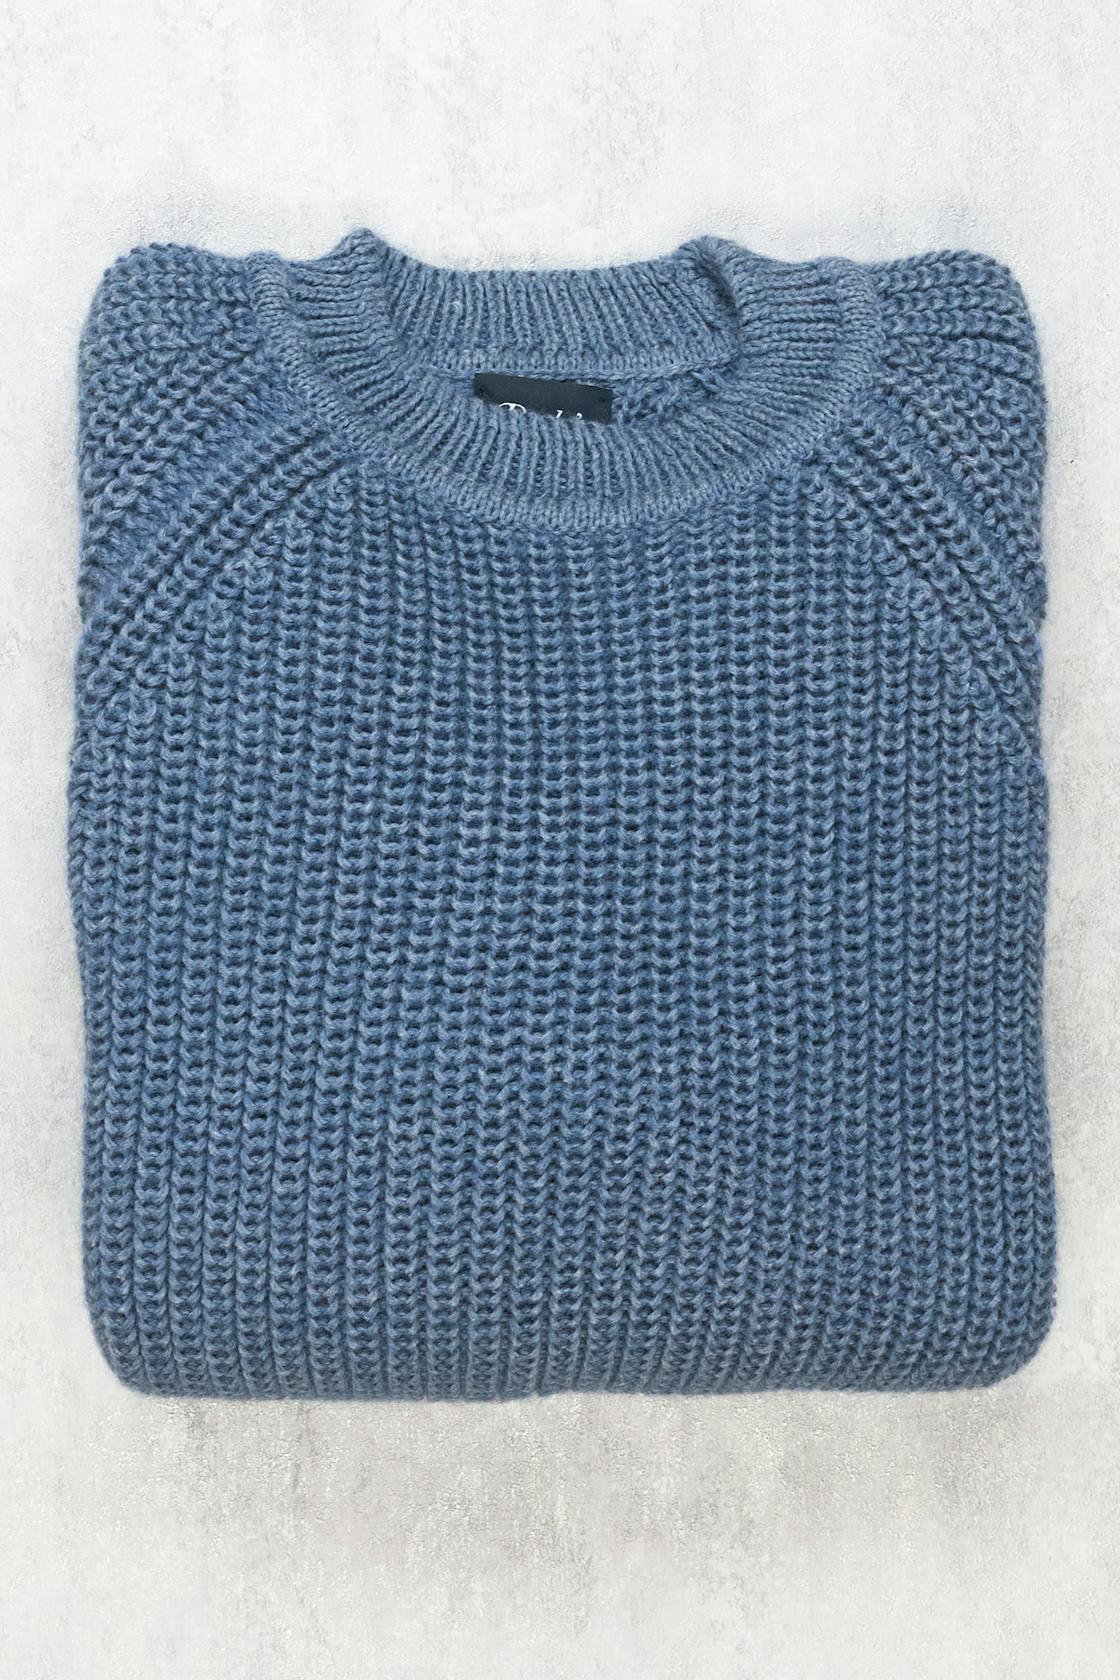 Drake's Blue Mohair/Cotton Sweater